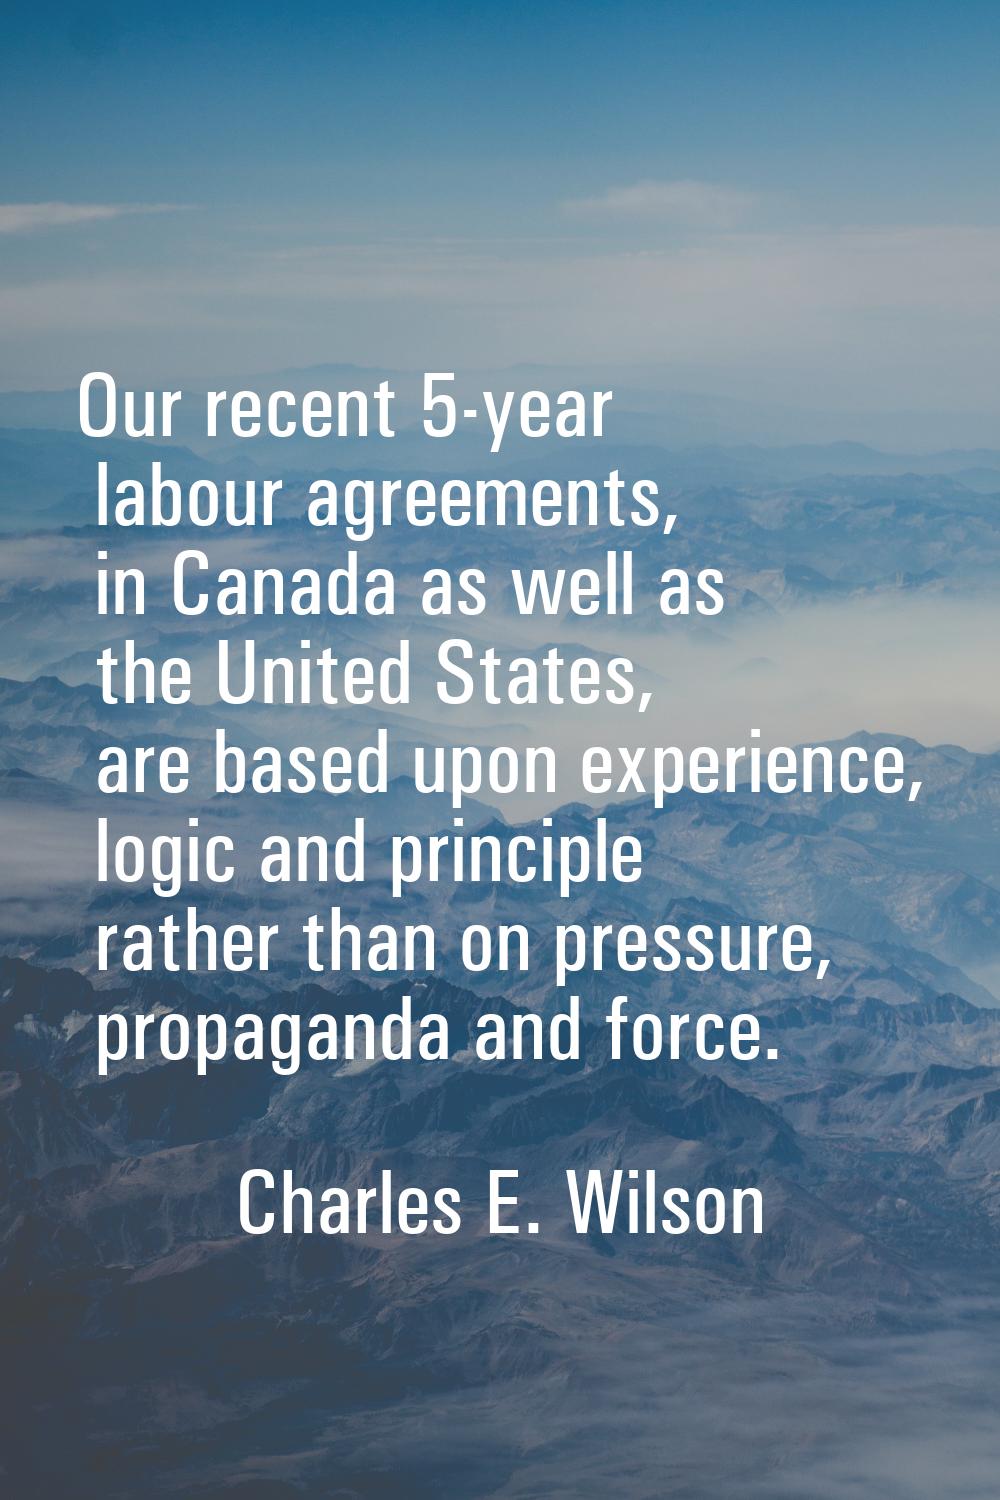 Our recent 5-year labour agreements, in Canada as well as the United States, are based upon experie